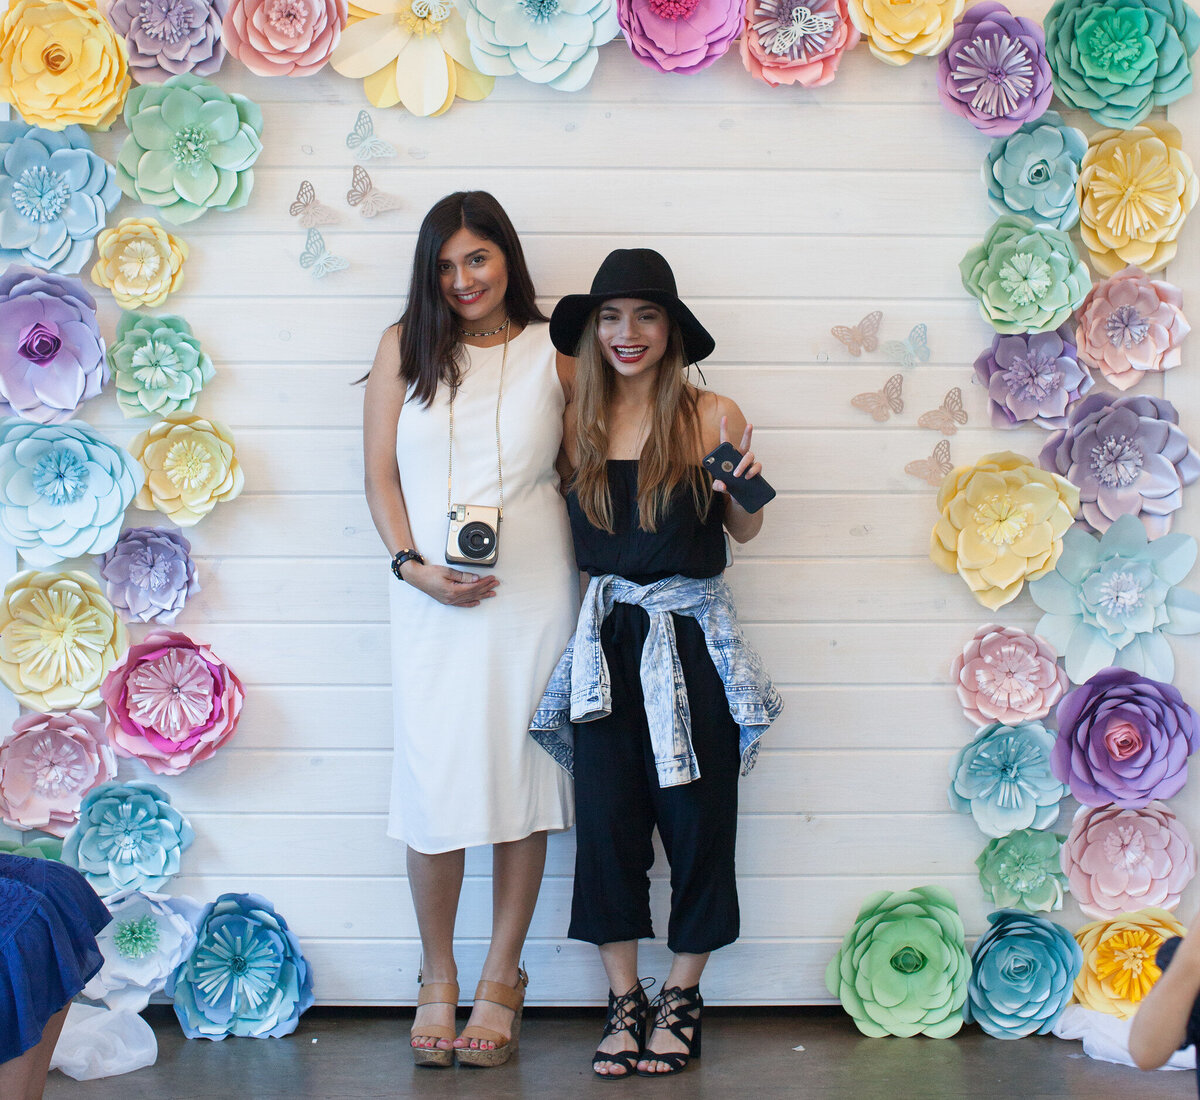 Two women posing in front of a white backdrop decorated with large colorful flowers and butterflies